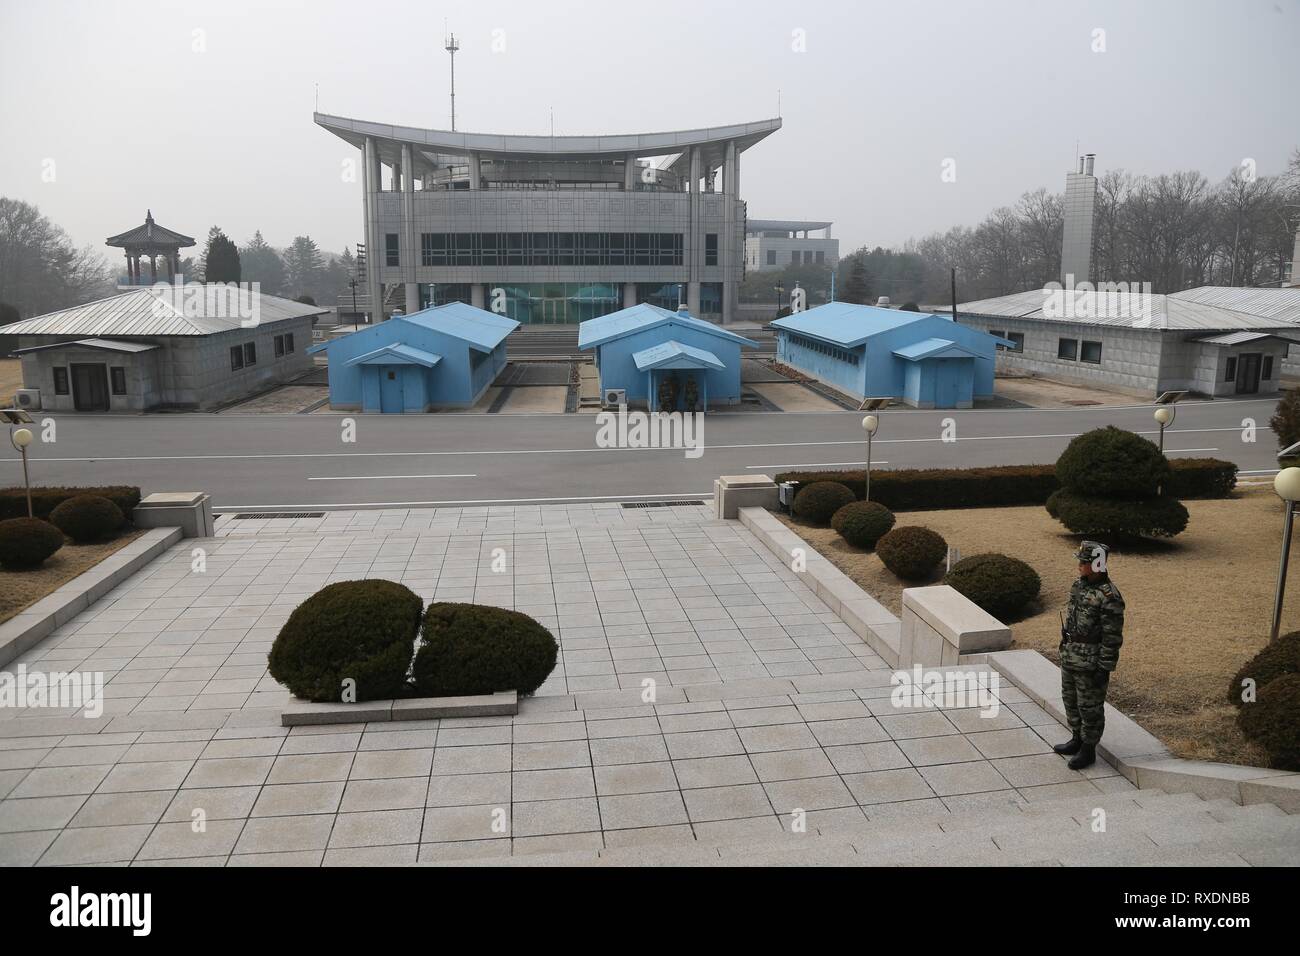 (190309) -- PYONGYANG, March 9, 2019 (Xinhua) -- Photo taken on March 5, 2019 shows pavilions on the military demarcation line (MDL) in the Joint Security Area of the truce village of Panmunjom. Panmunjom became a symbol of division on the Korean Peninsula as the Korean Armistice Agreement, which paused the 1950-53 Korean War, was signed there on July 27, 1953. It is now a symbol of rapprochement and dialogue between the two sides on the Korean peninsula. (Xinhua/Cheng Dayu) Stock Photo